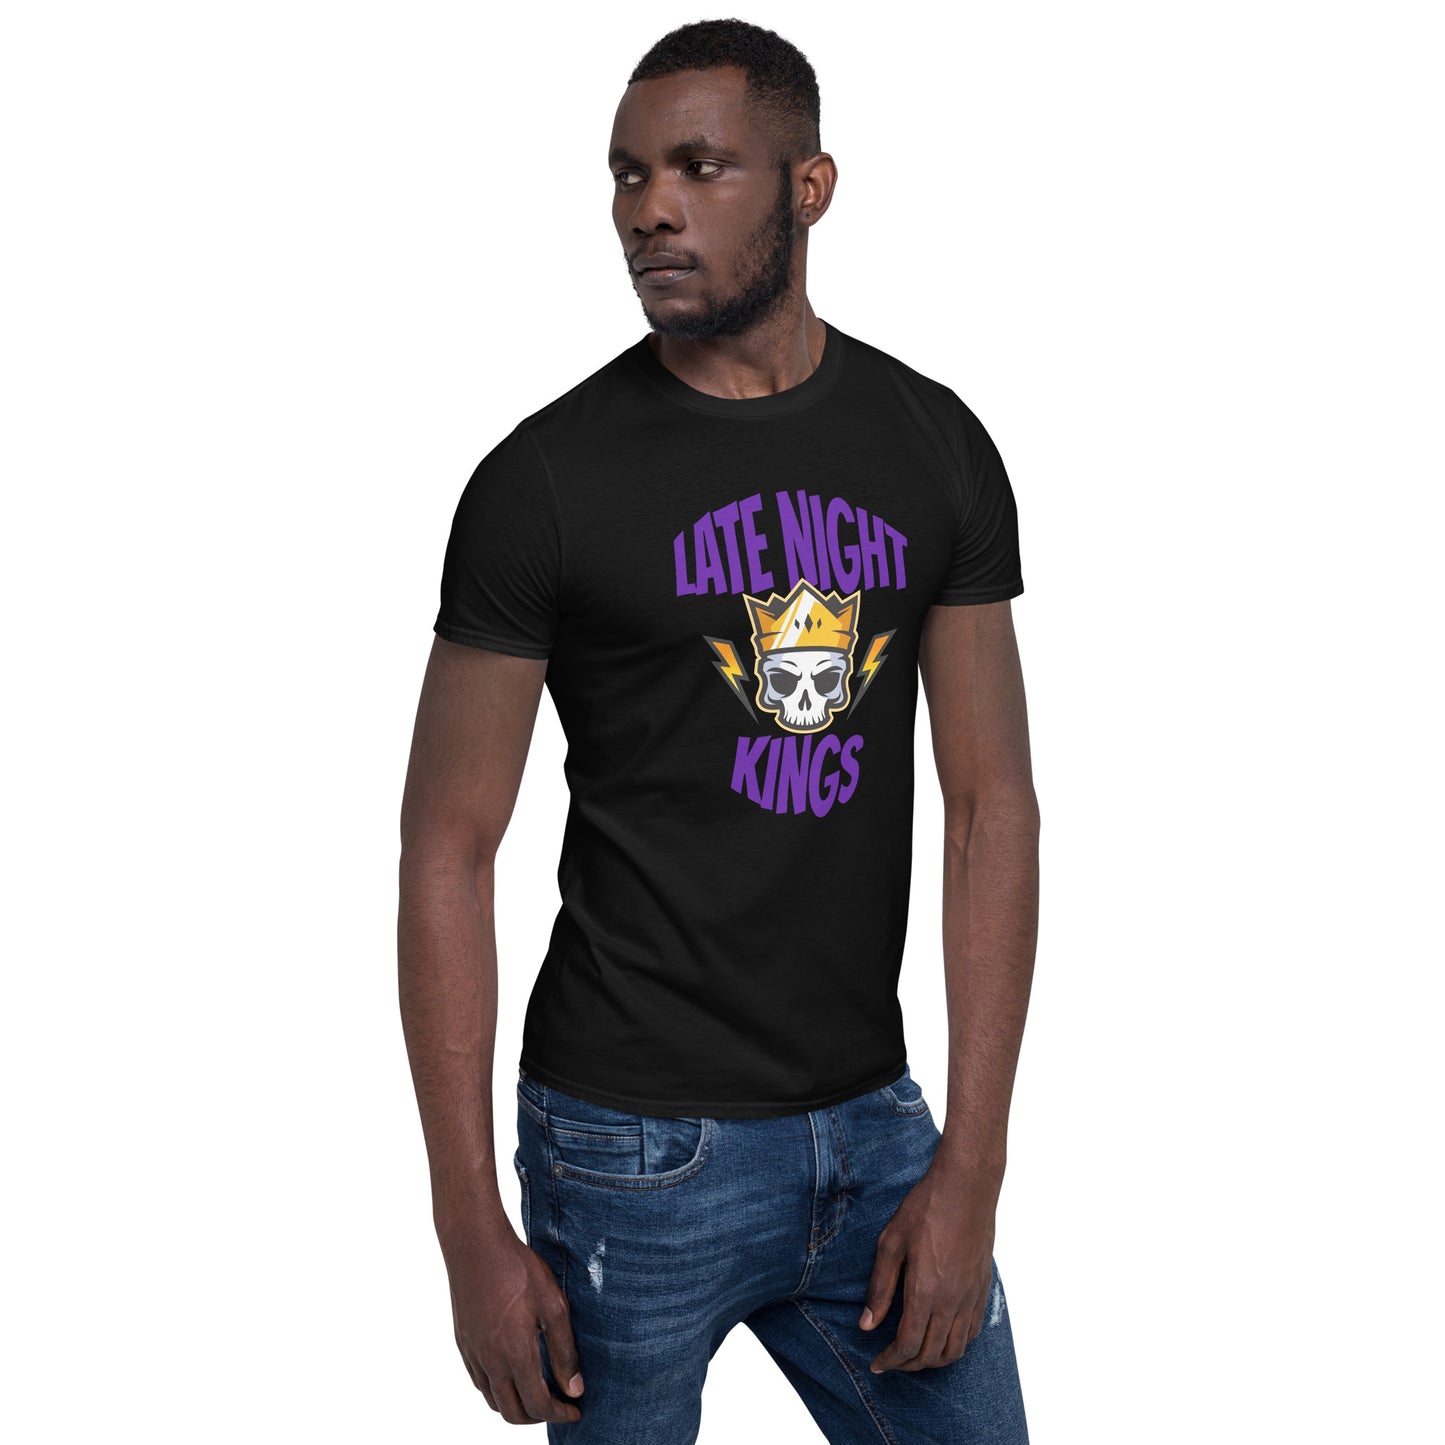 Short-Sleeve Unisex Bear the Astronot Late Night Kings T-Shirt